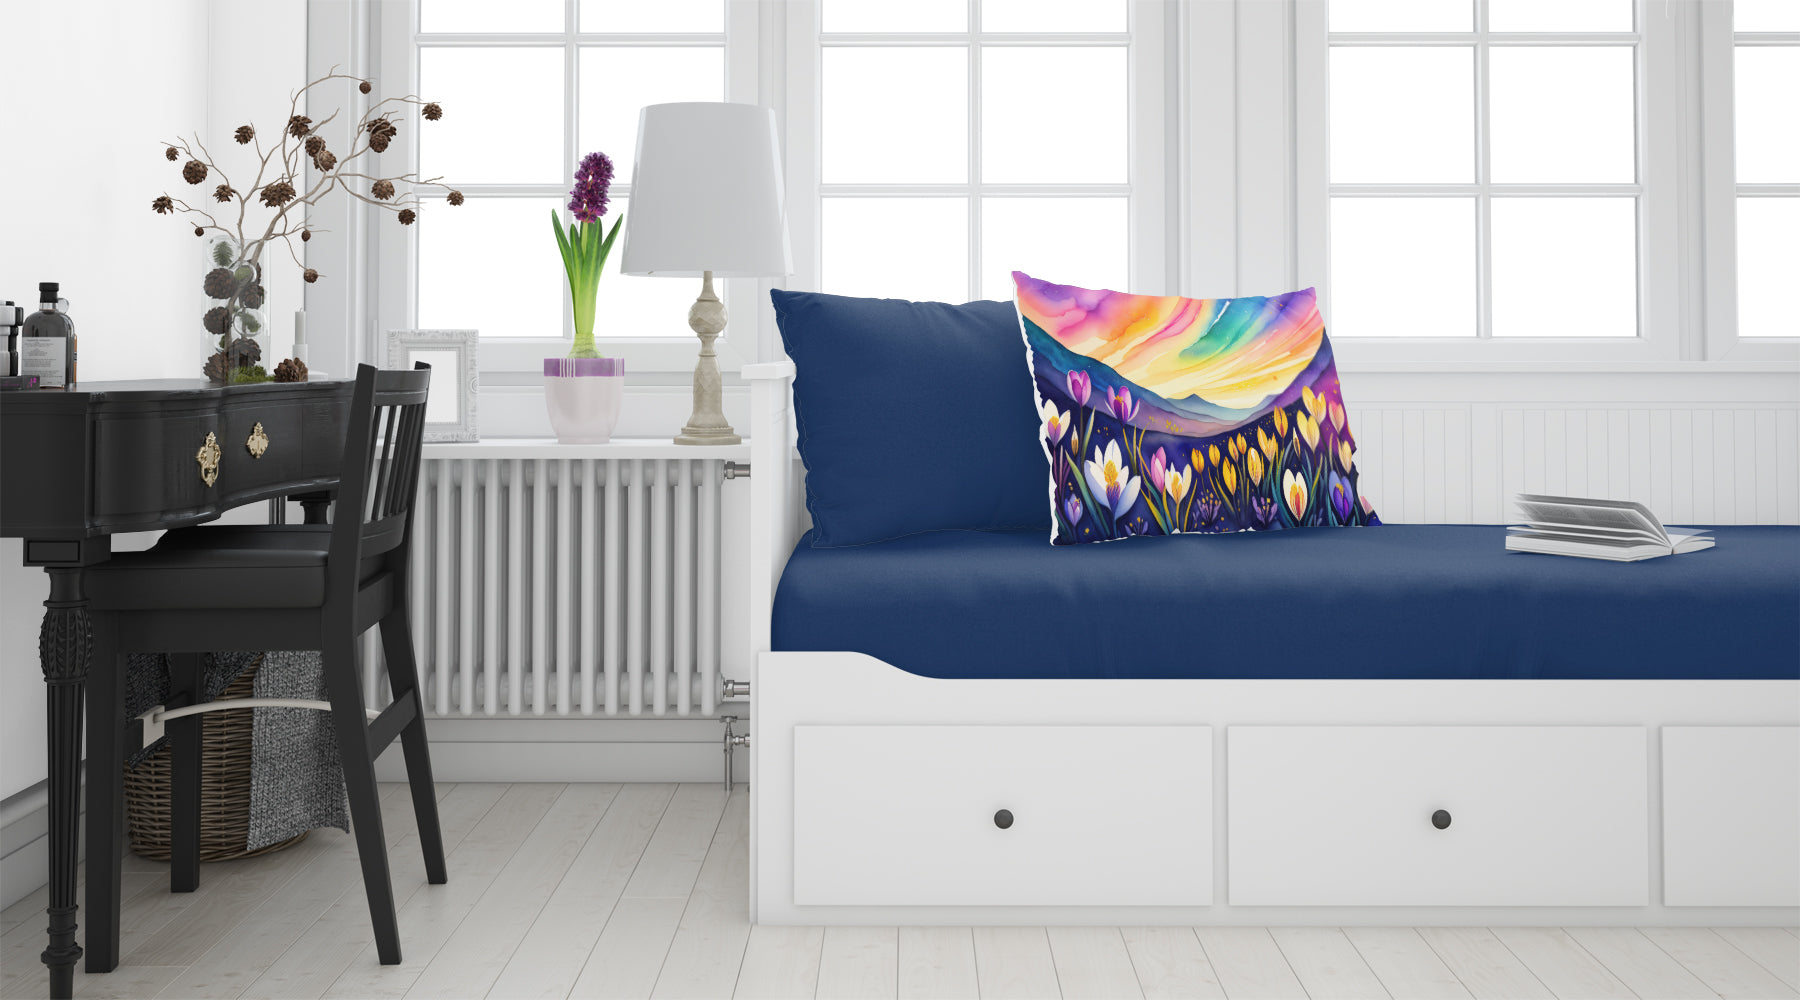 Buy this Crocus in Color Fabric Standard Pillowcase